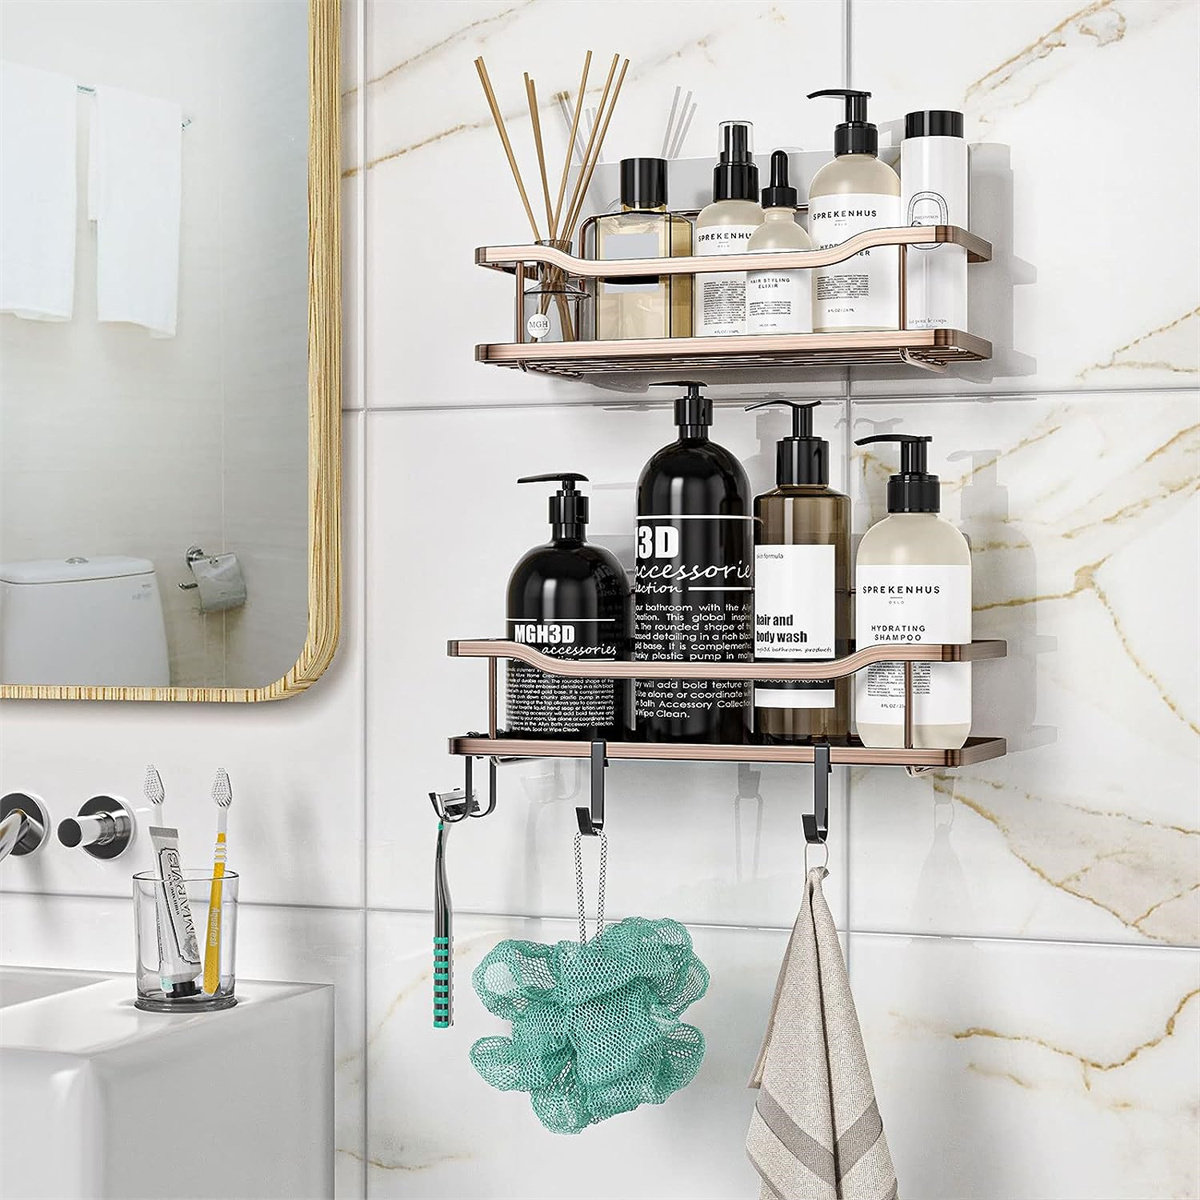 ODesign Adhesive Shower Caddy Basket Shelf with Hooks for Shampoo Razor  Soap Dish Holder Kitchen Bathroom Apartment Home Organizer No Drilling Wall